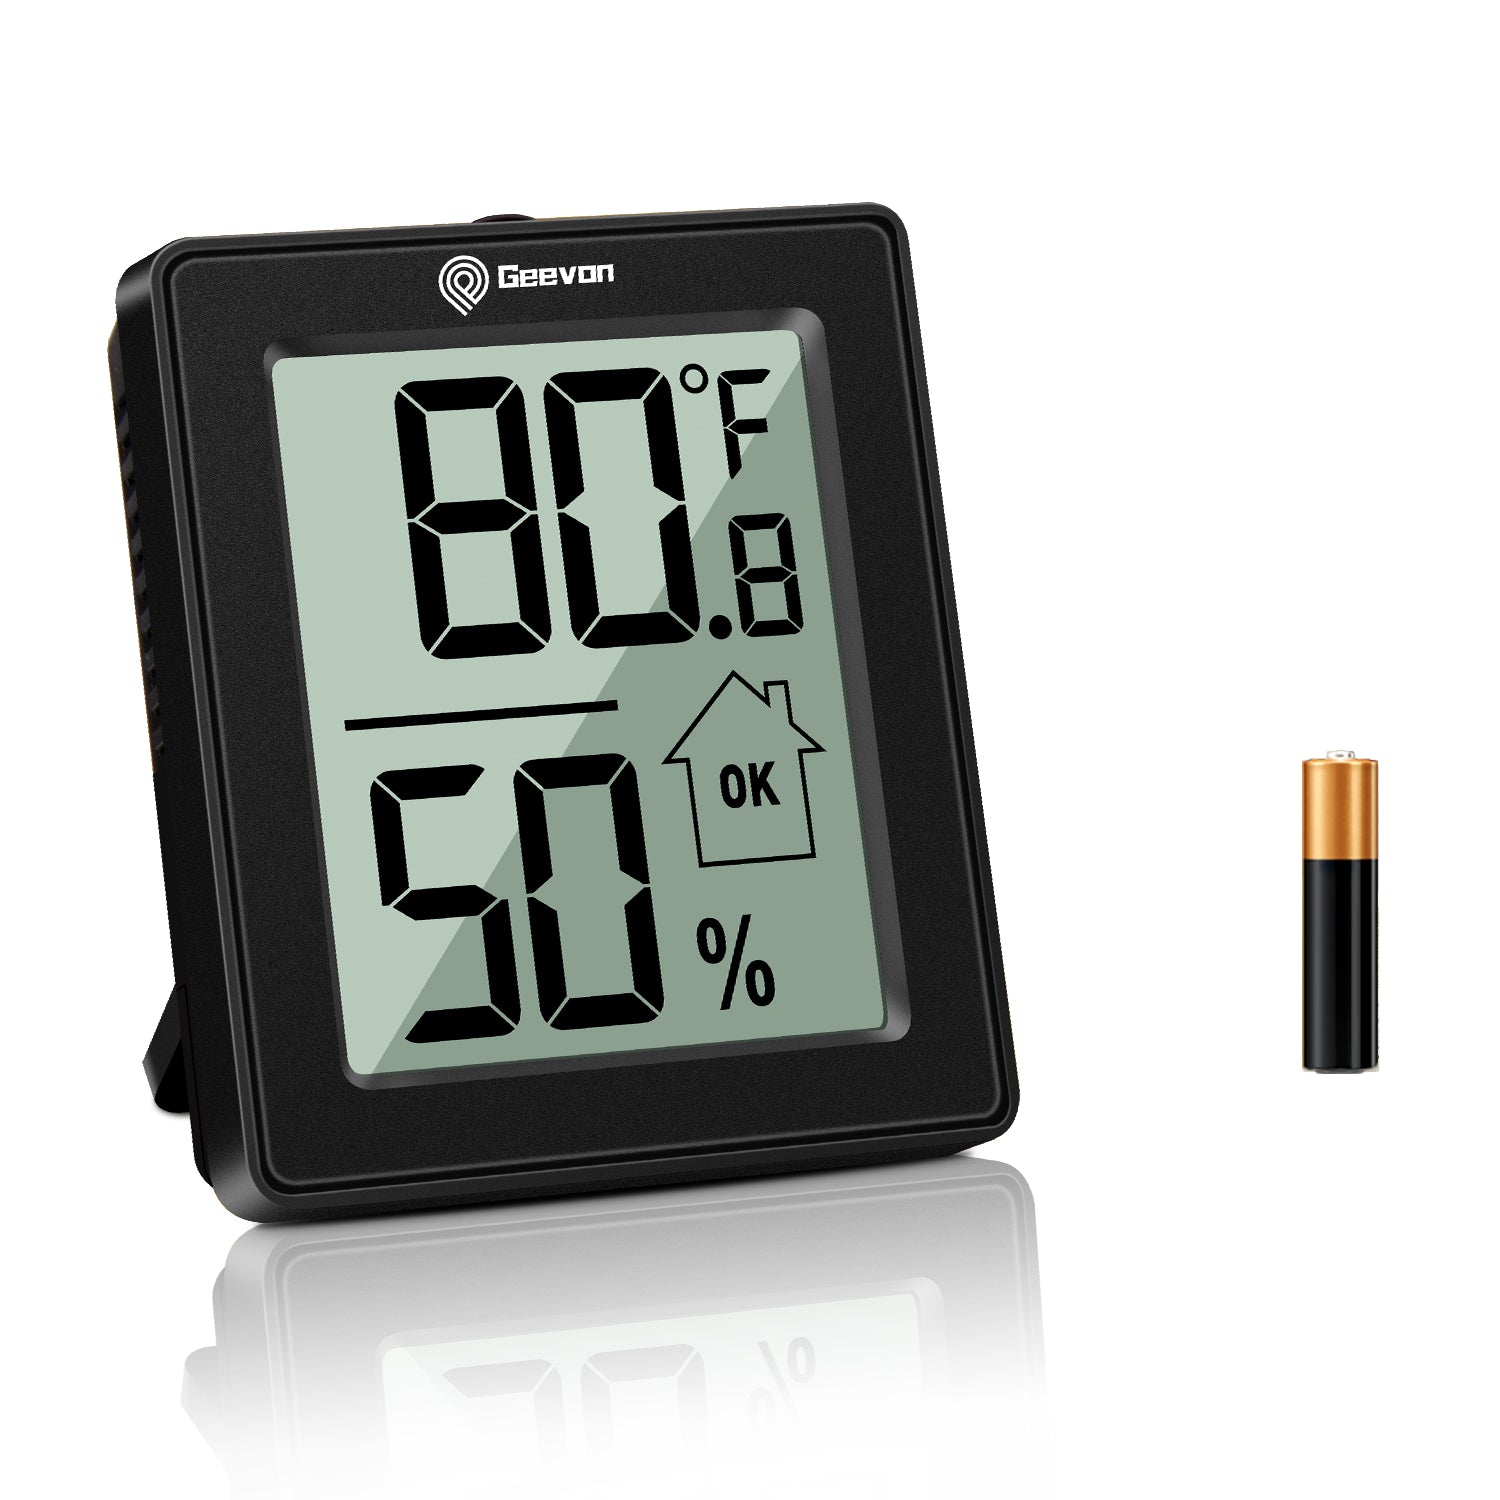 Geevon Weather Station Wireless Indoor Outdoor Thermometer, Large Colo –  Geevon store